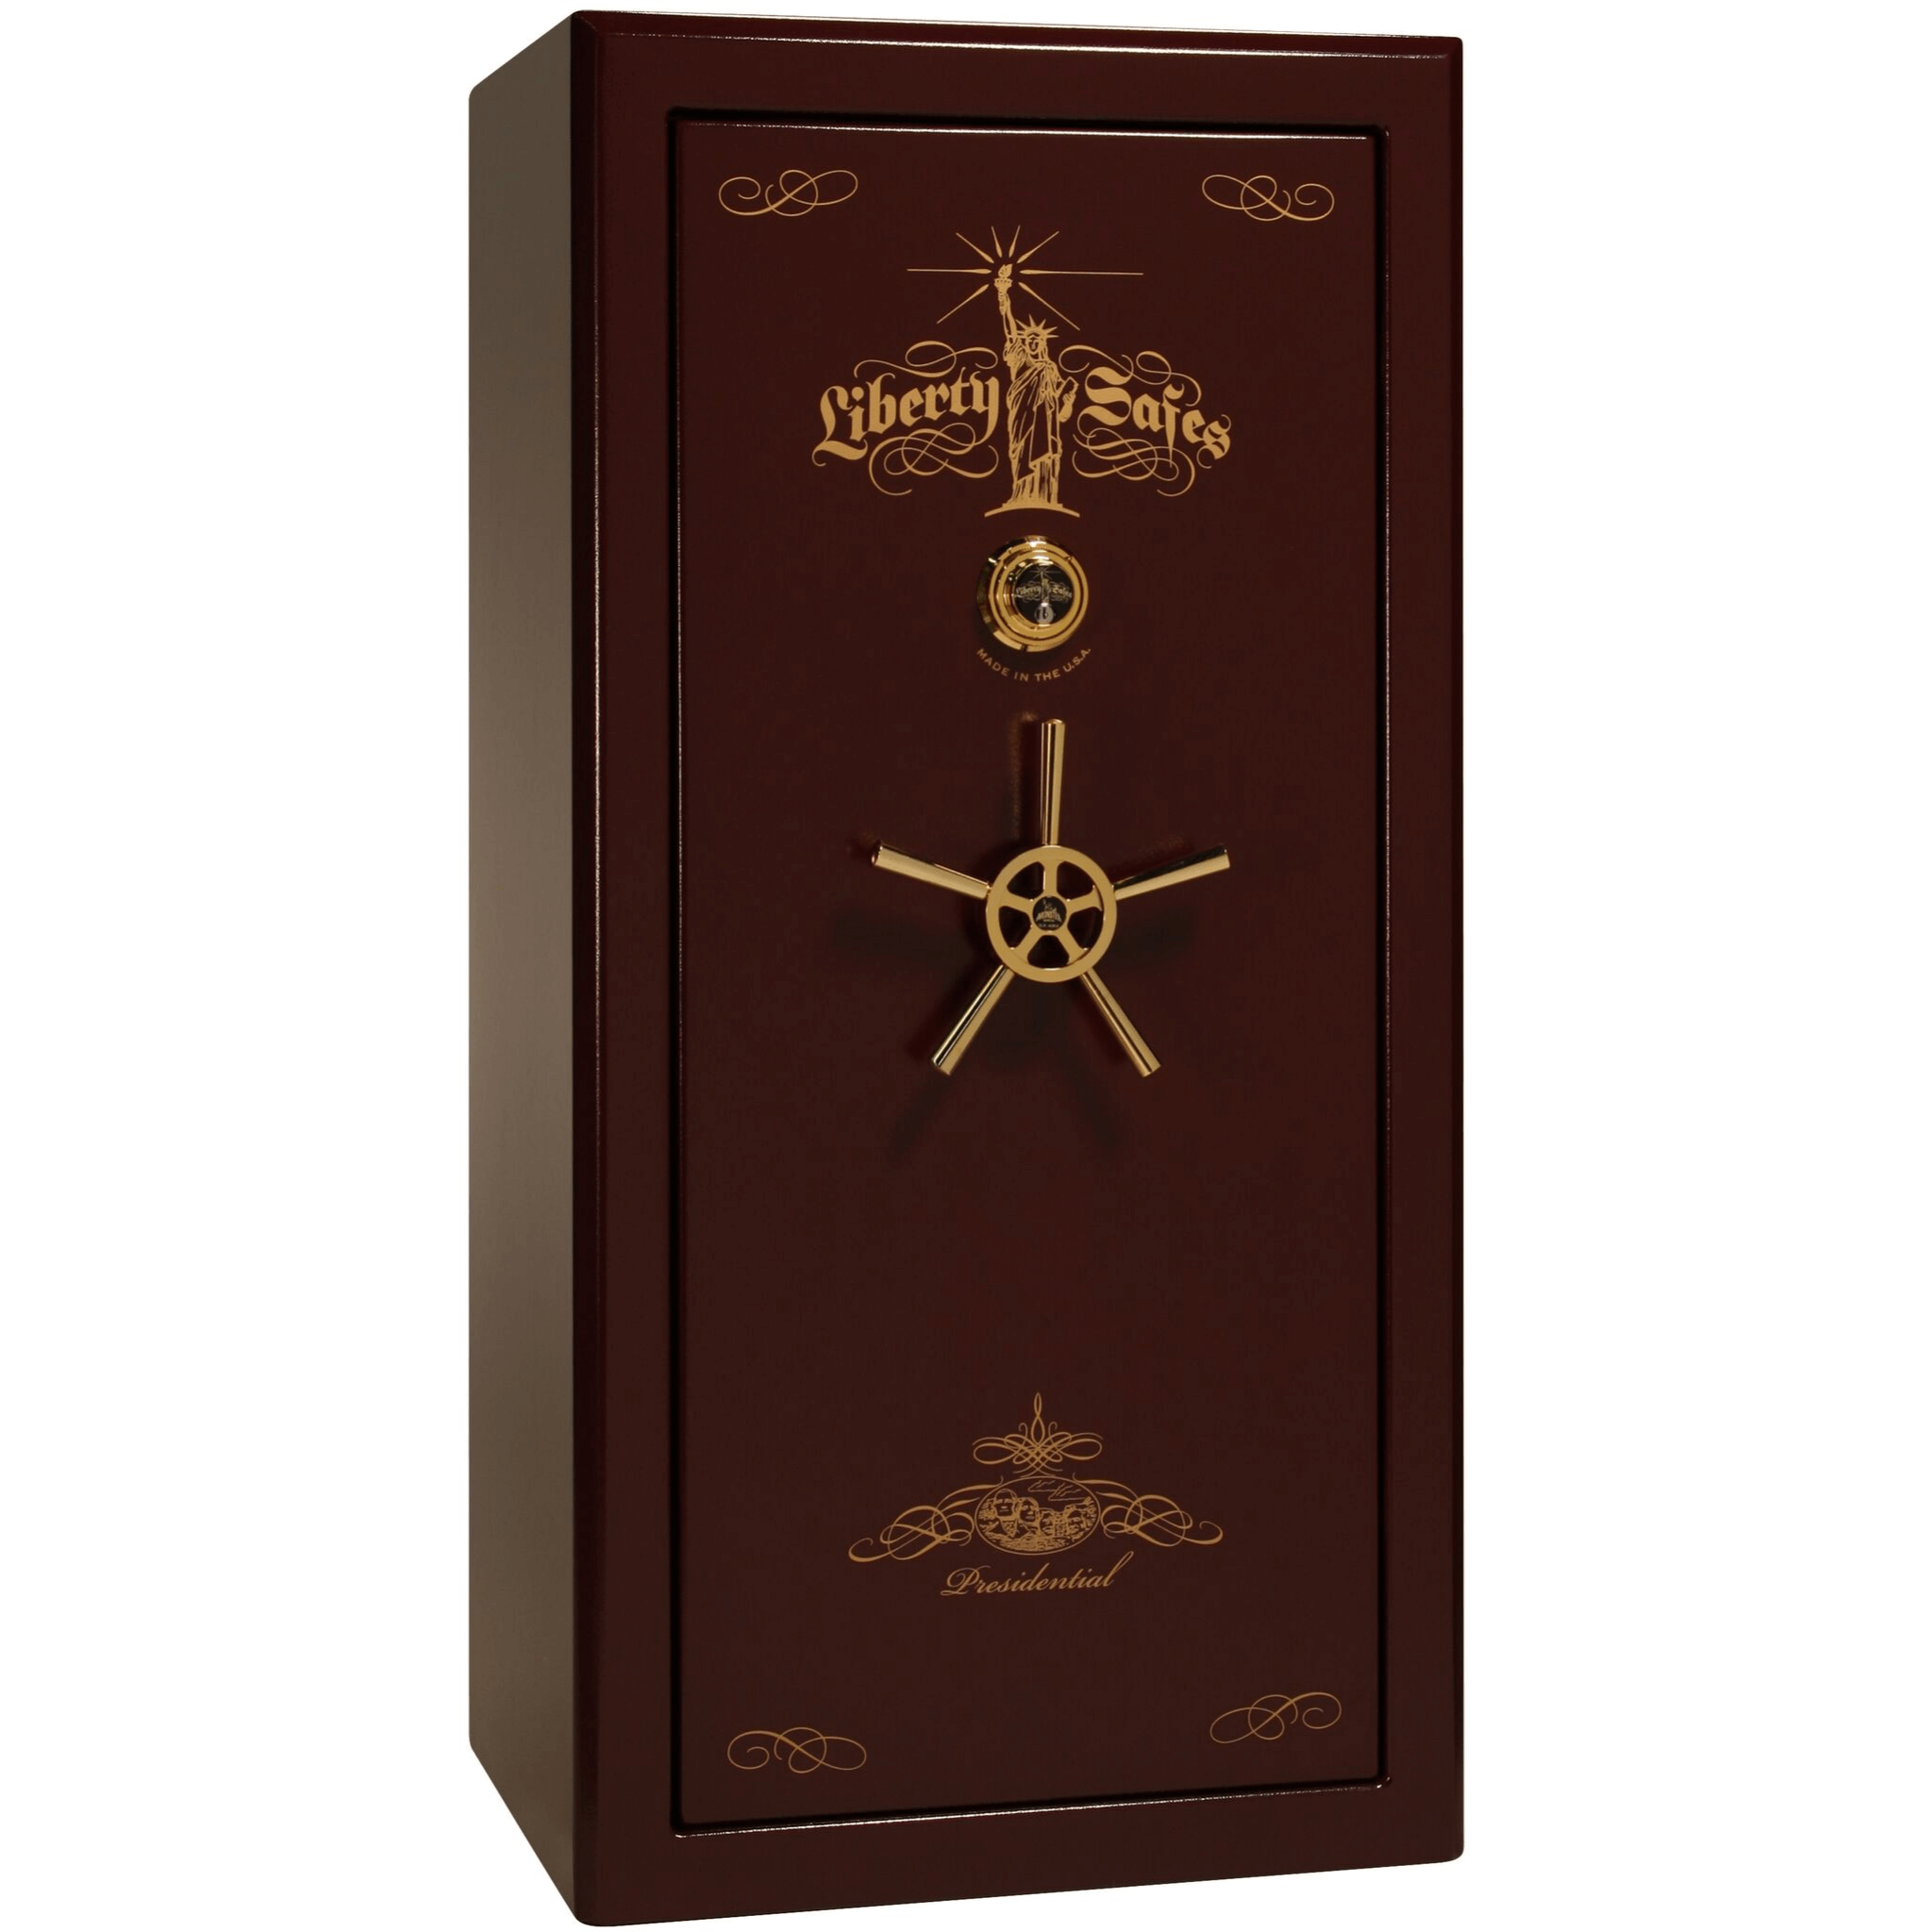 Presidential Series | Level 8 Security | 2.5 Hours Fire Protection | 25 | Dimensions: 60.5"(H) x 30.25"(W) x 28.5"(D) | Burgundy Gloss Gold Hardware | Mechanical Lock